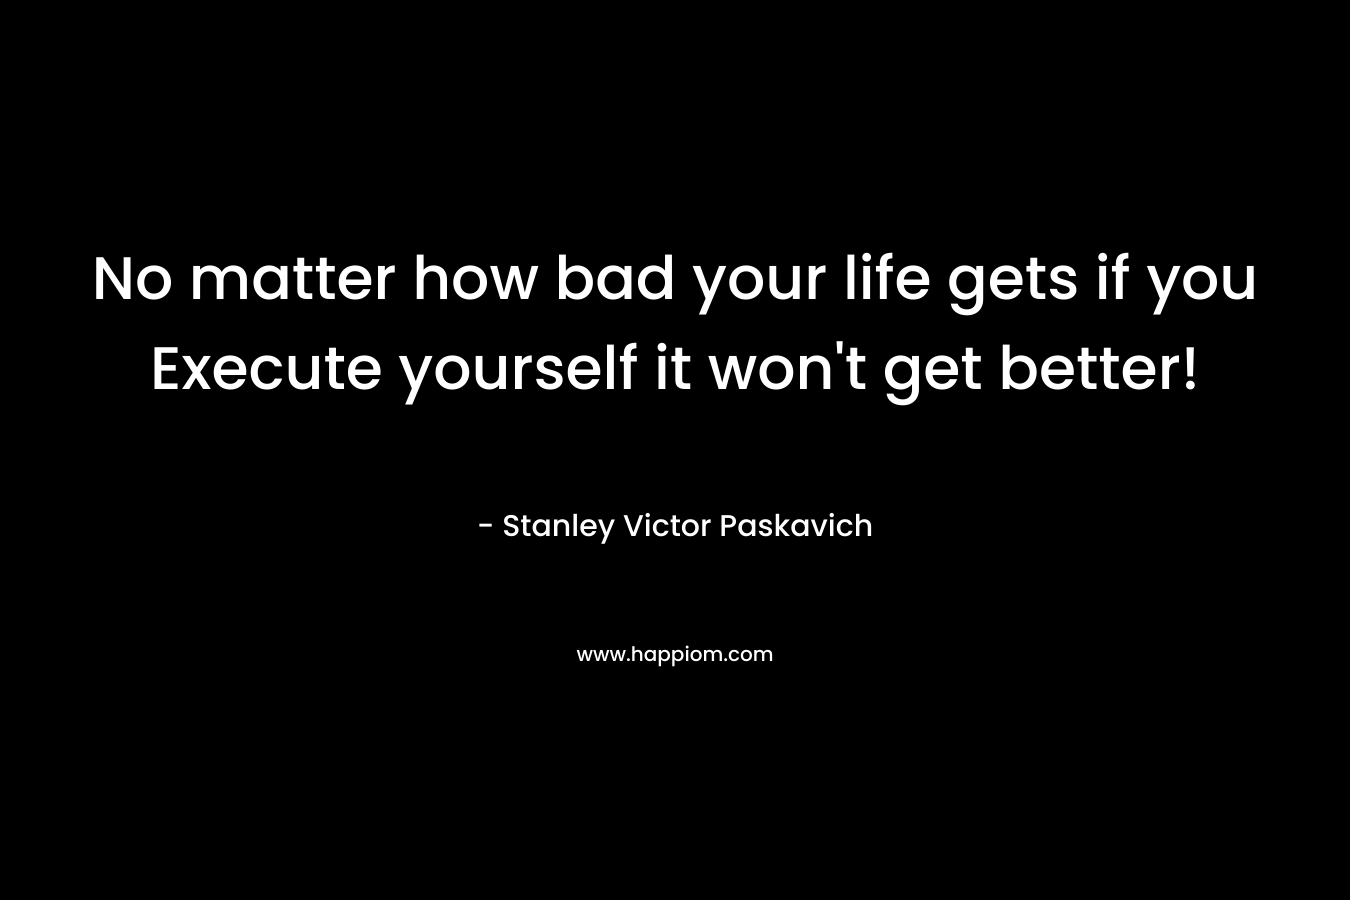 No matter how bad your life gets if you Execute yourself it won’t get better! – Stanley Victor Paskavich